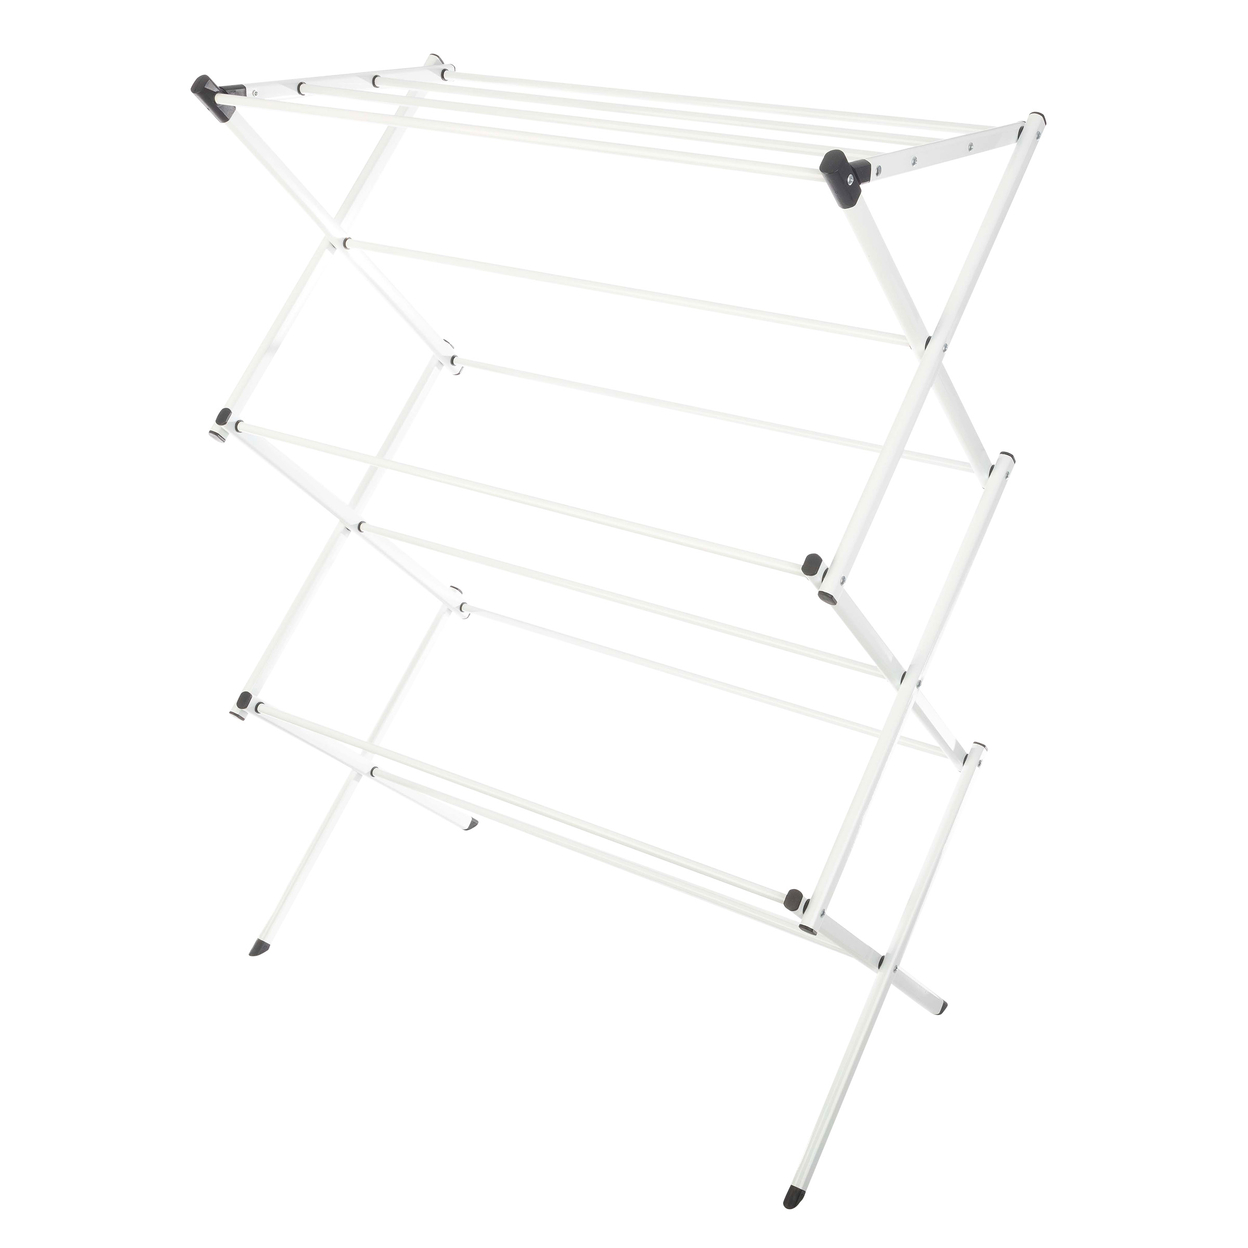 Clothes Drying Rack Portable Rack For Hanging And Air-Drying Laundry, White